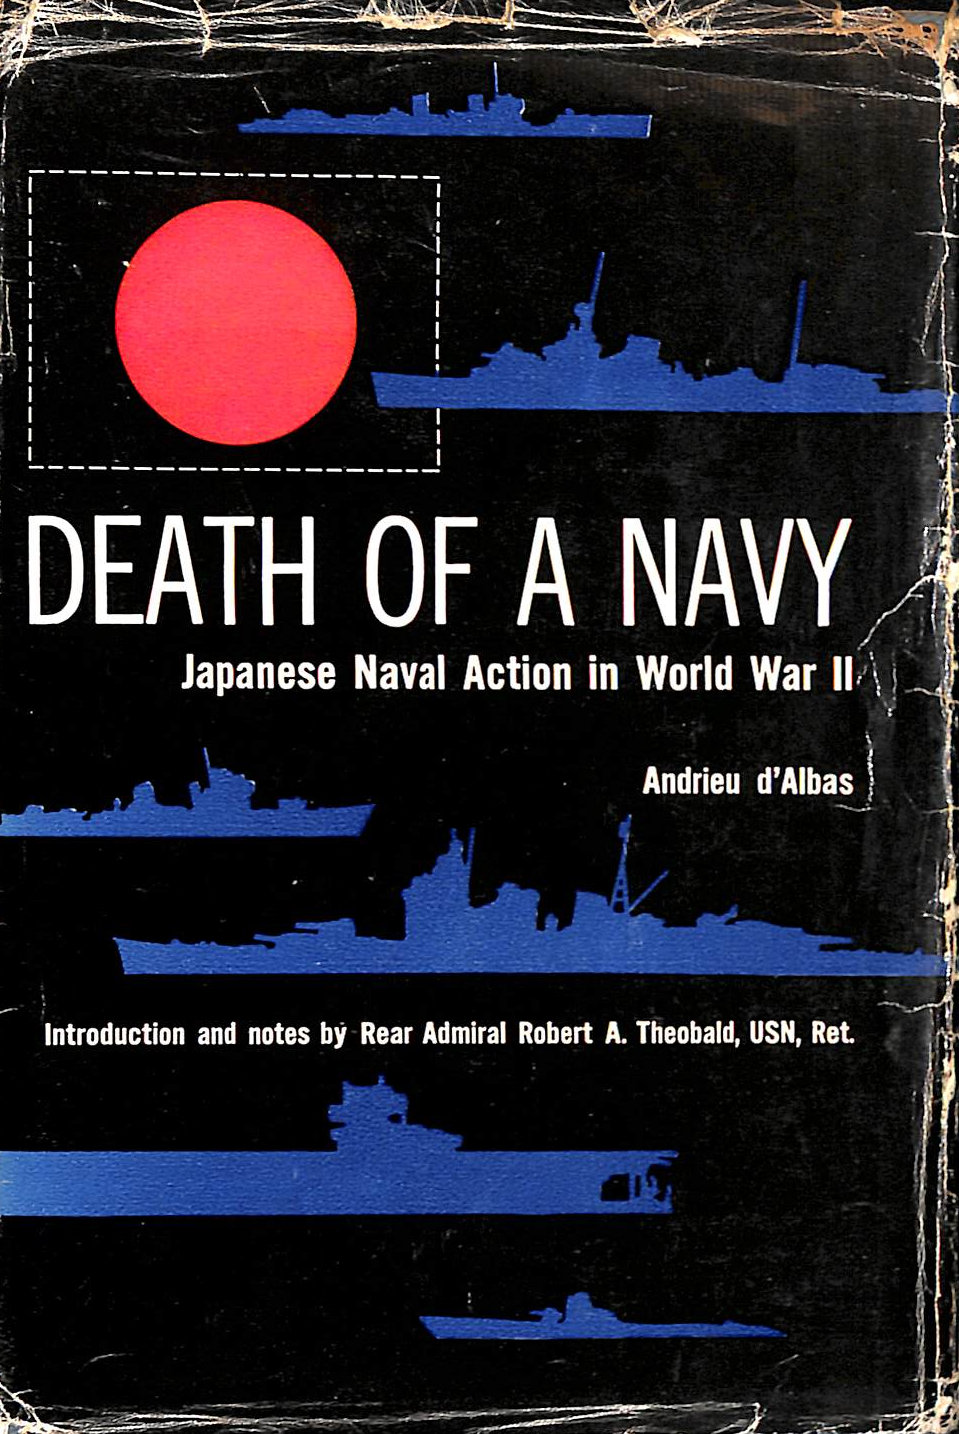 ANDRIEU D'ALBAS - Death Of A Navy: Japanese Naval Action In World War Ii